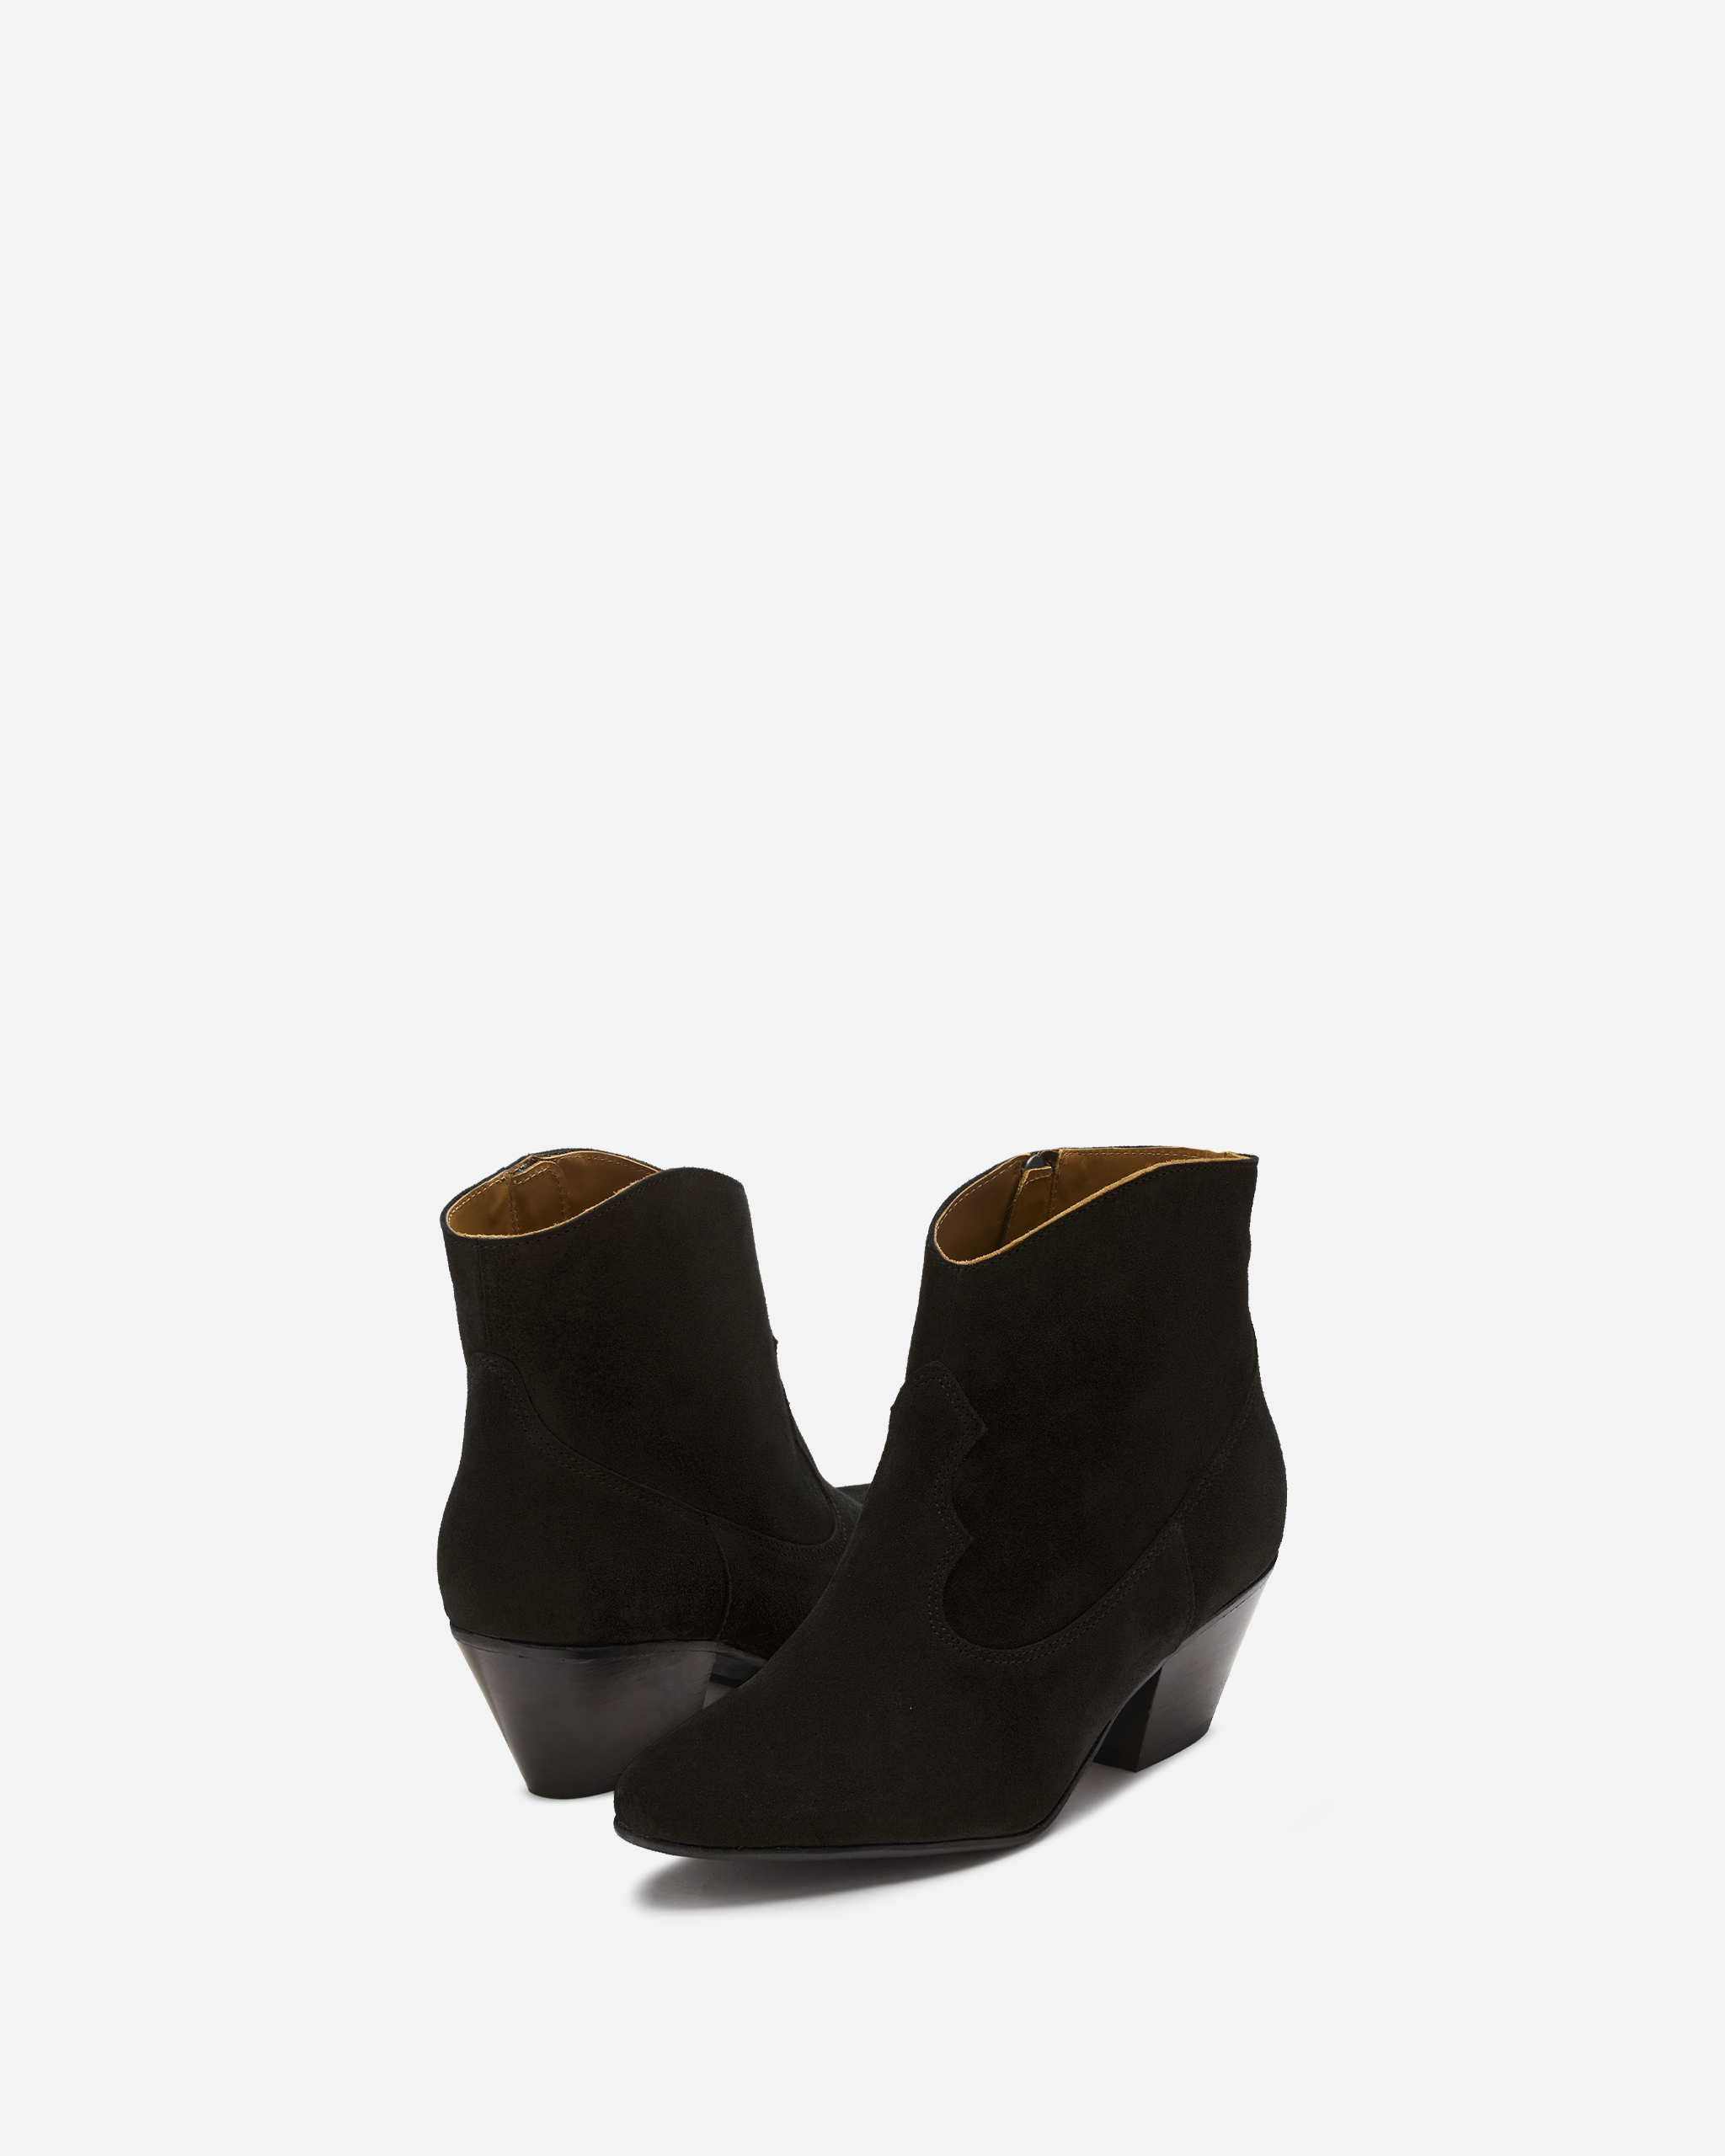 cowboy western style black suede heeled ankle boot